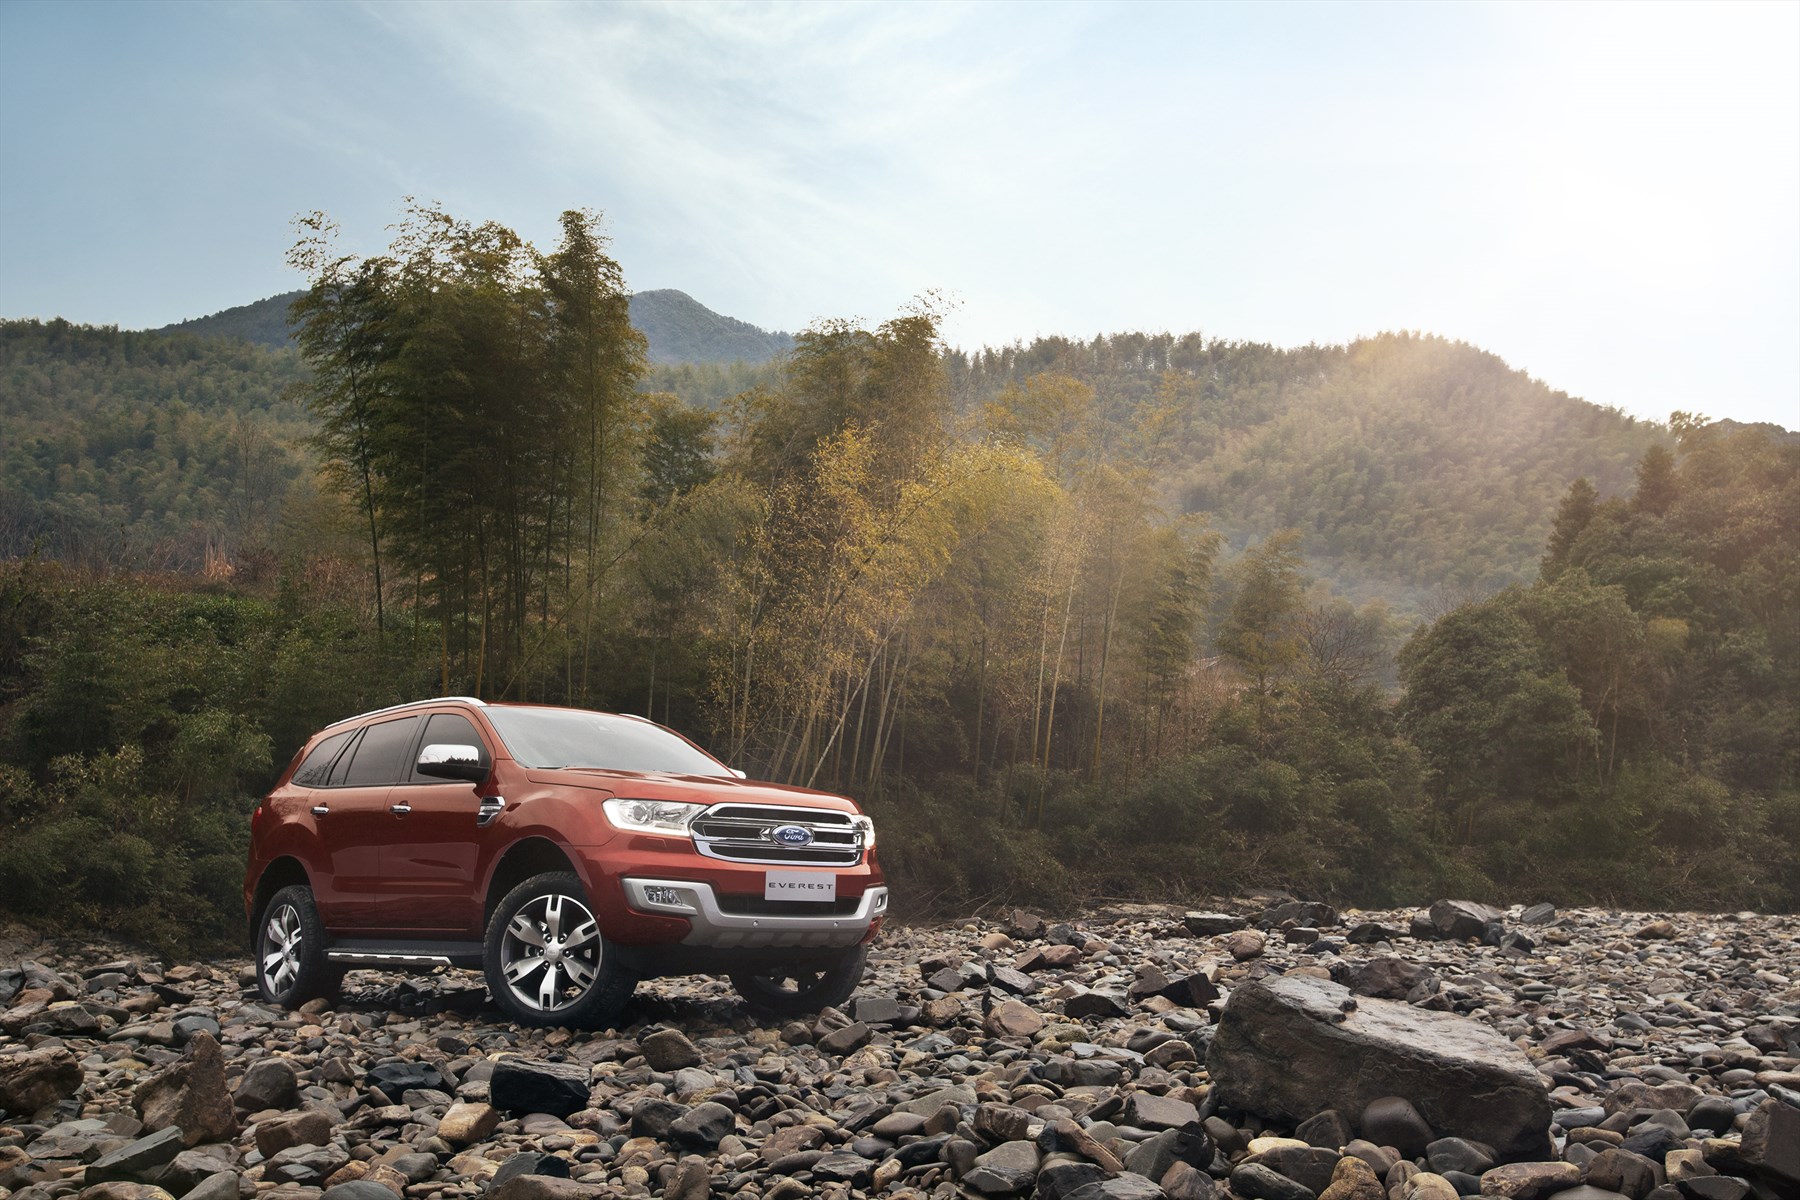 Ford Plans To Bring Smart New Ford Everest for South Africa